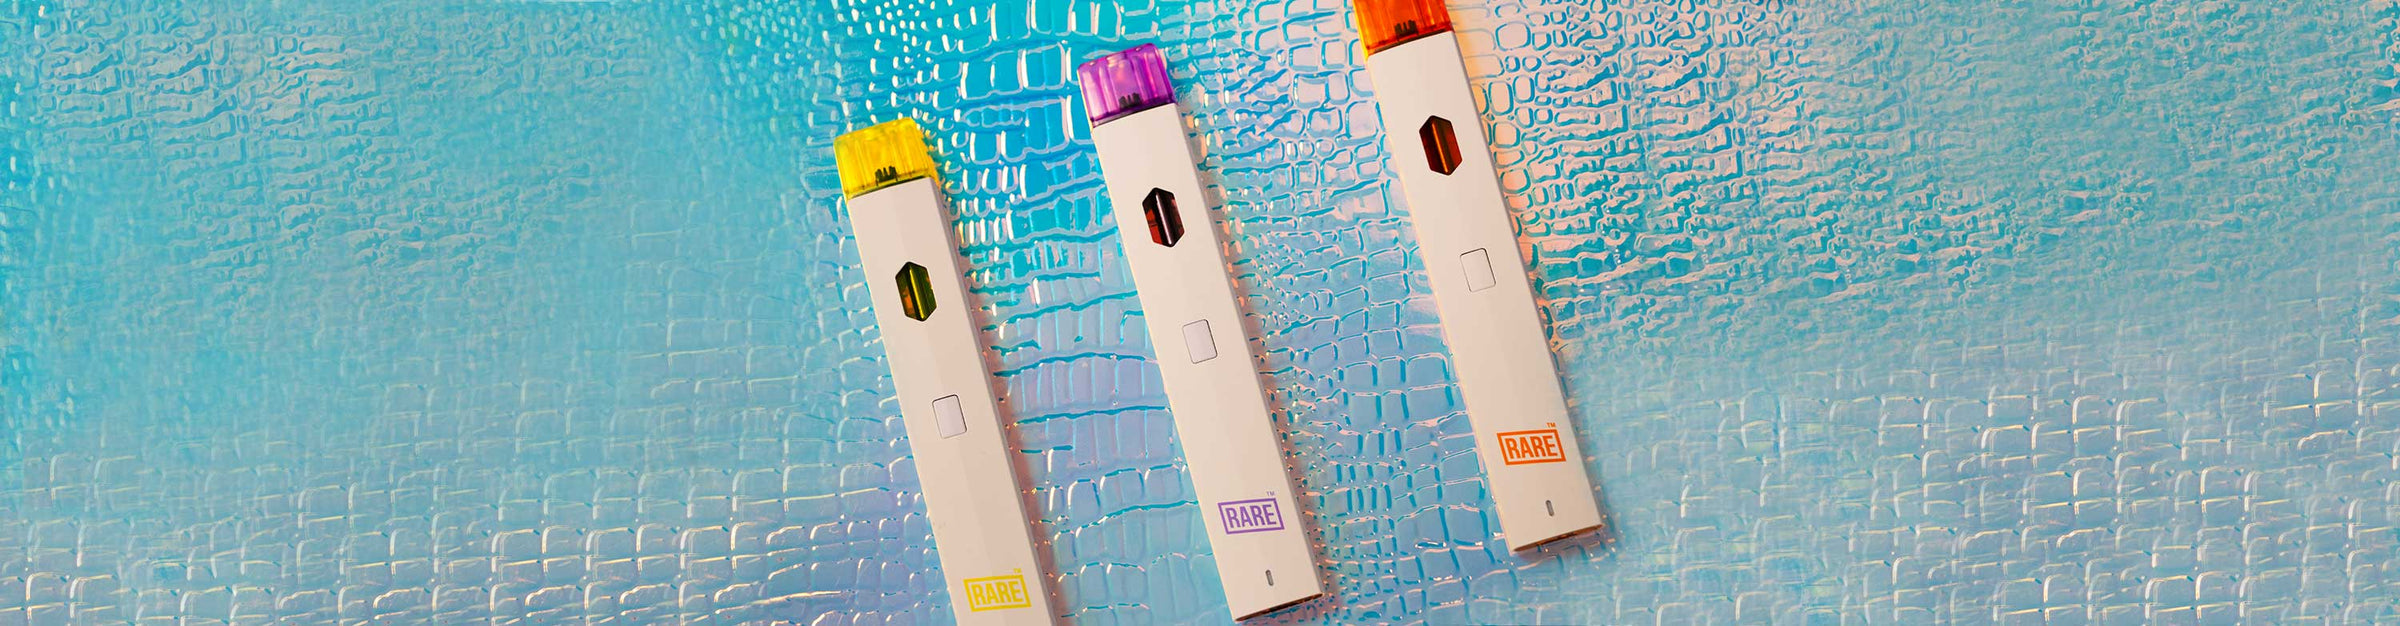 Rare CBD vaporizers laying down on colorful textured background